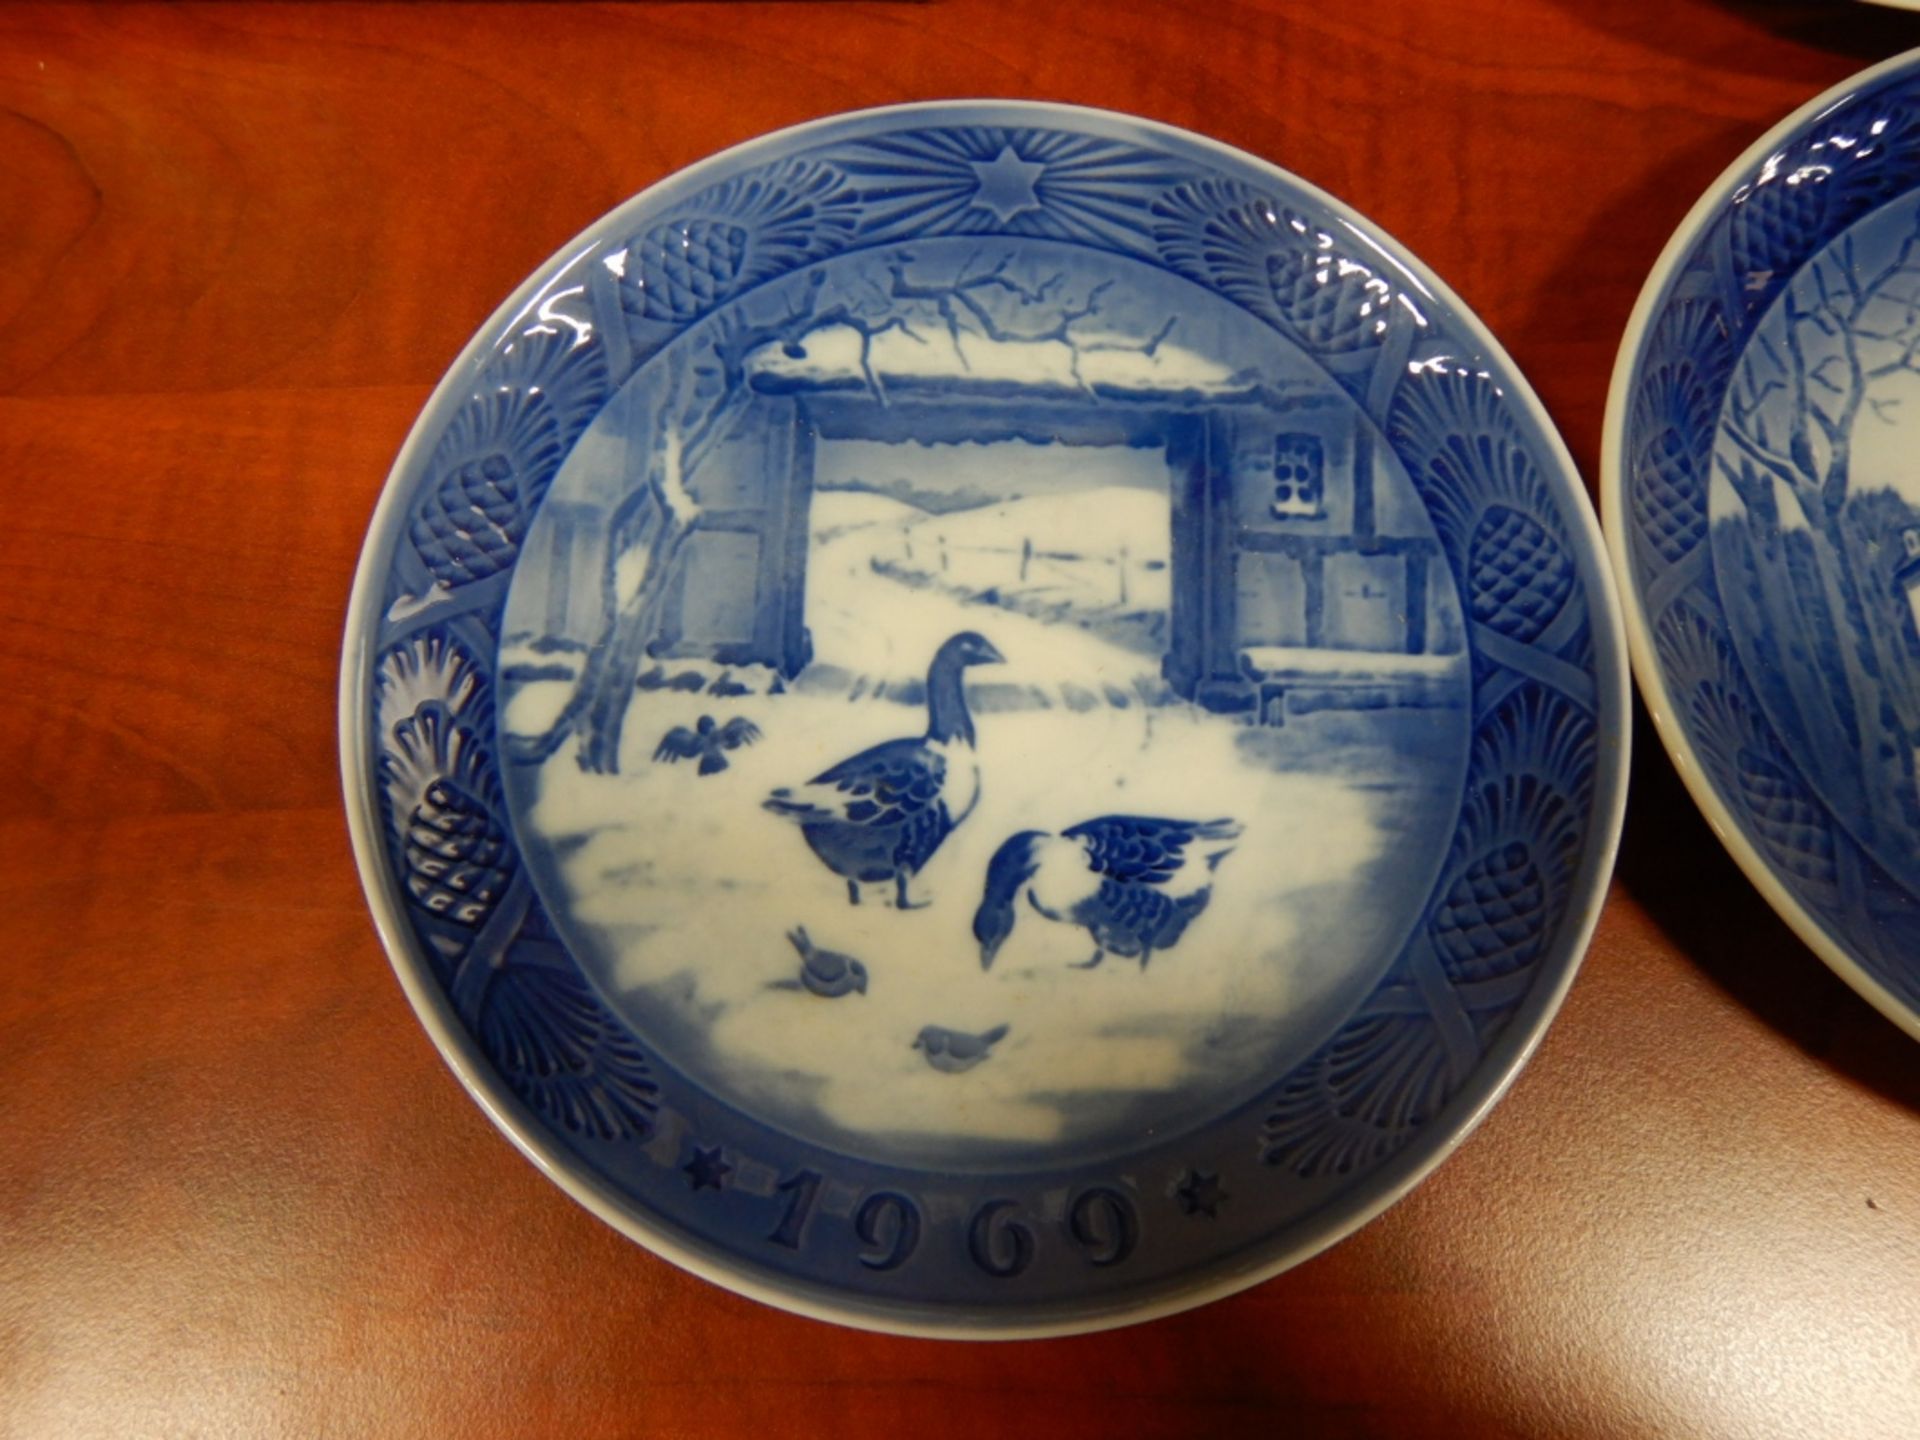 L/O ROYAL COPENHAGEN "GREENLAND SCENERY" COLLECTOR PLATES 1969-1979, 1-VIEWS OF WINNEPEG CHINA - Image 5 of 6